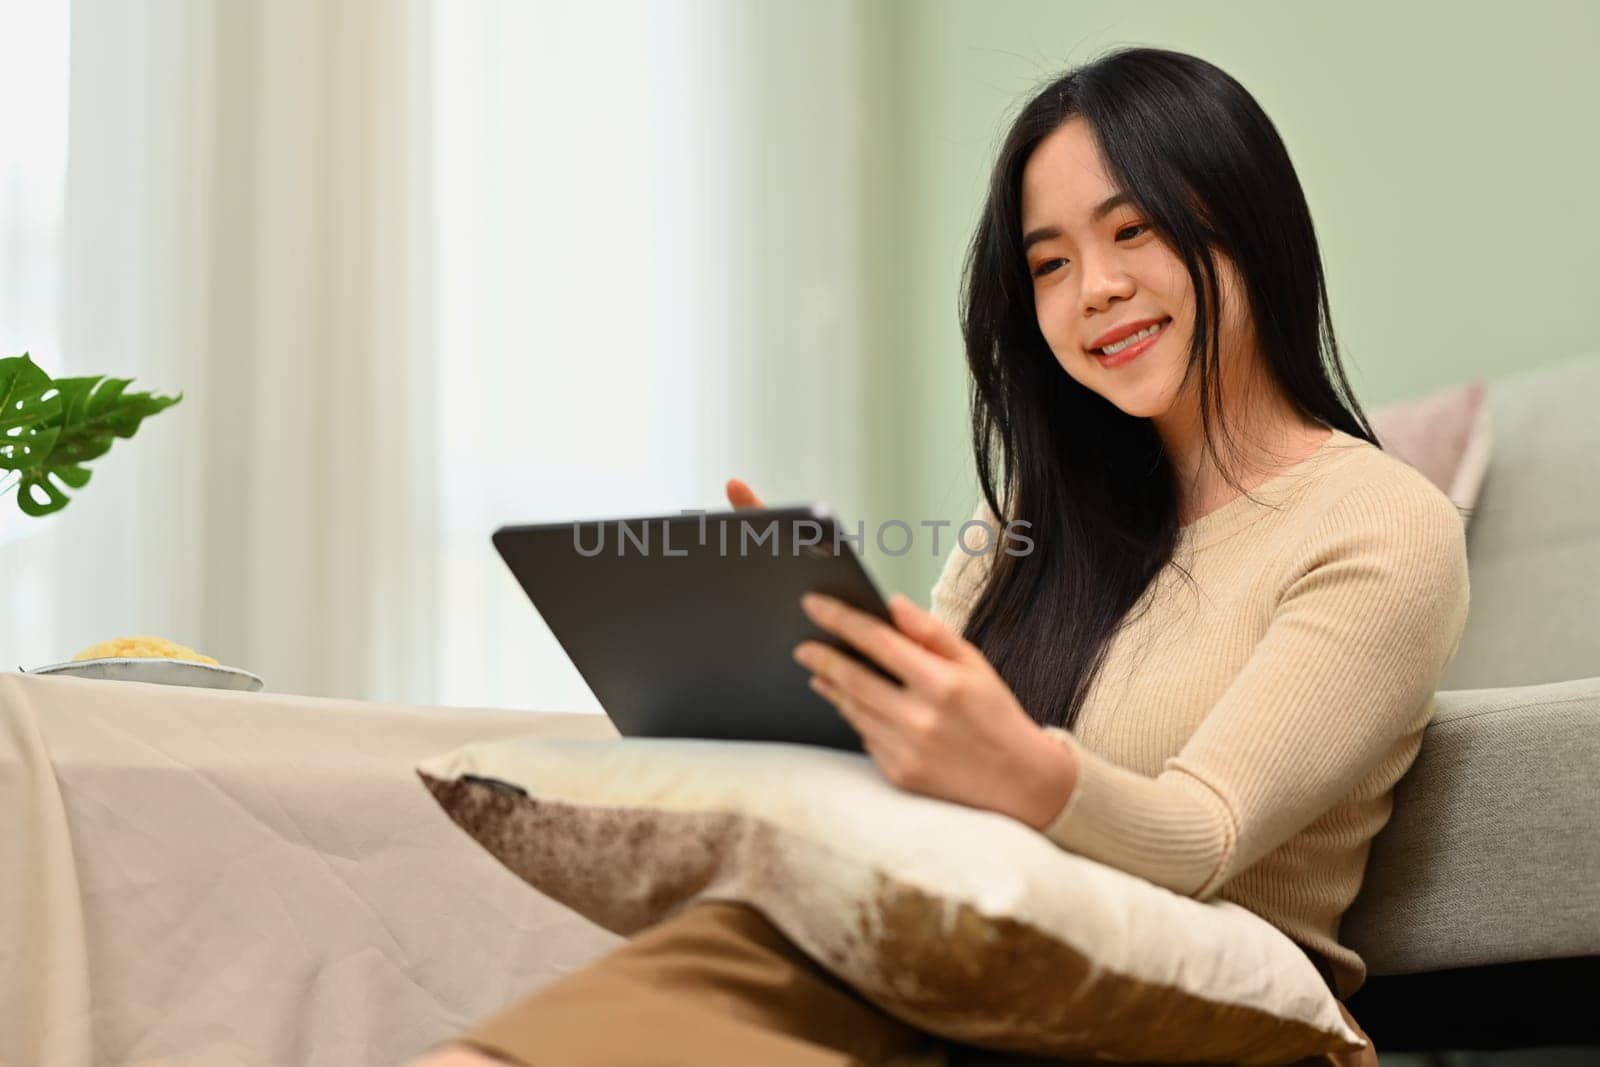 Cute, smiling young woman using digital tablet in living room. Technology, people and lifestyle concept by prathanchorruangsak